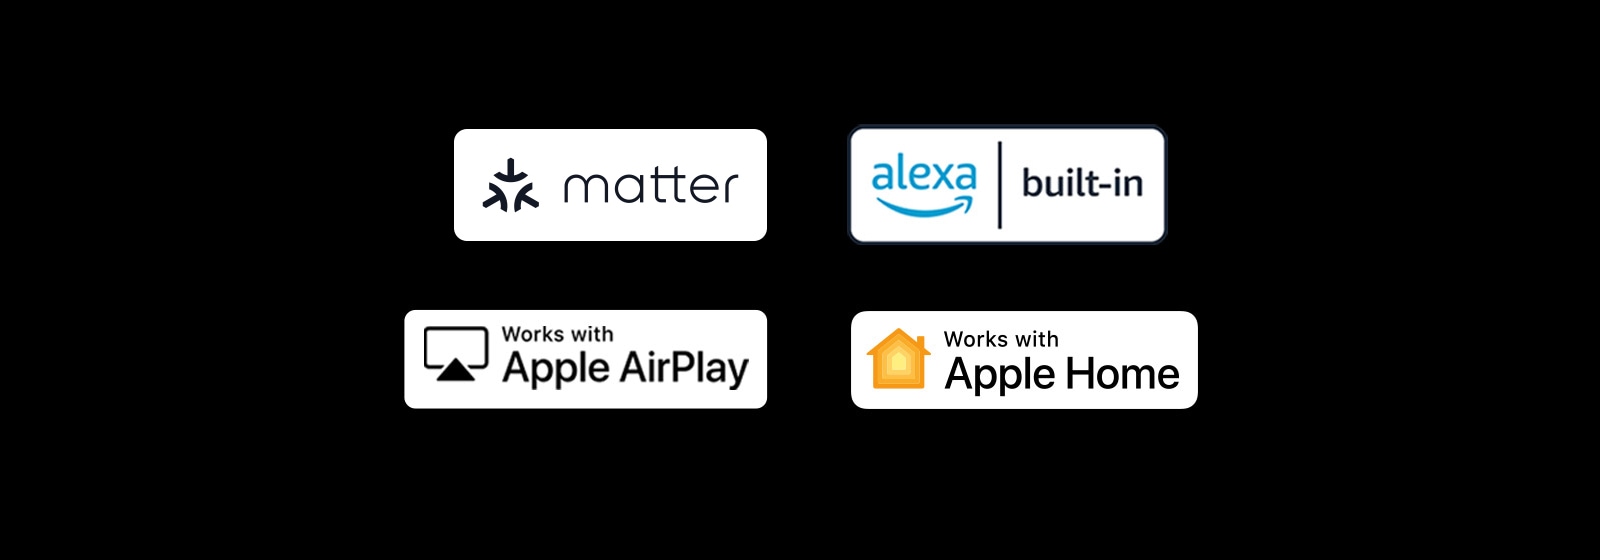 "The logo of alexa built-in The logo of works with Apple AirPlay The logo of works with Apple Home The logo of works with Matter"